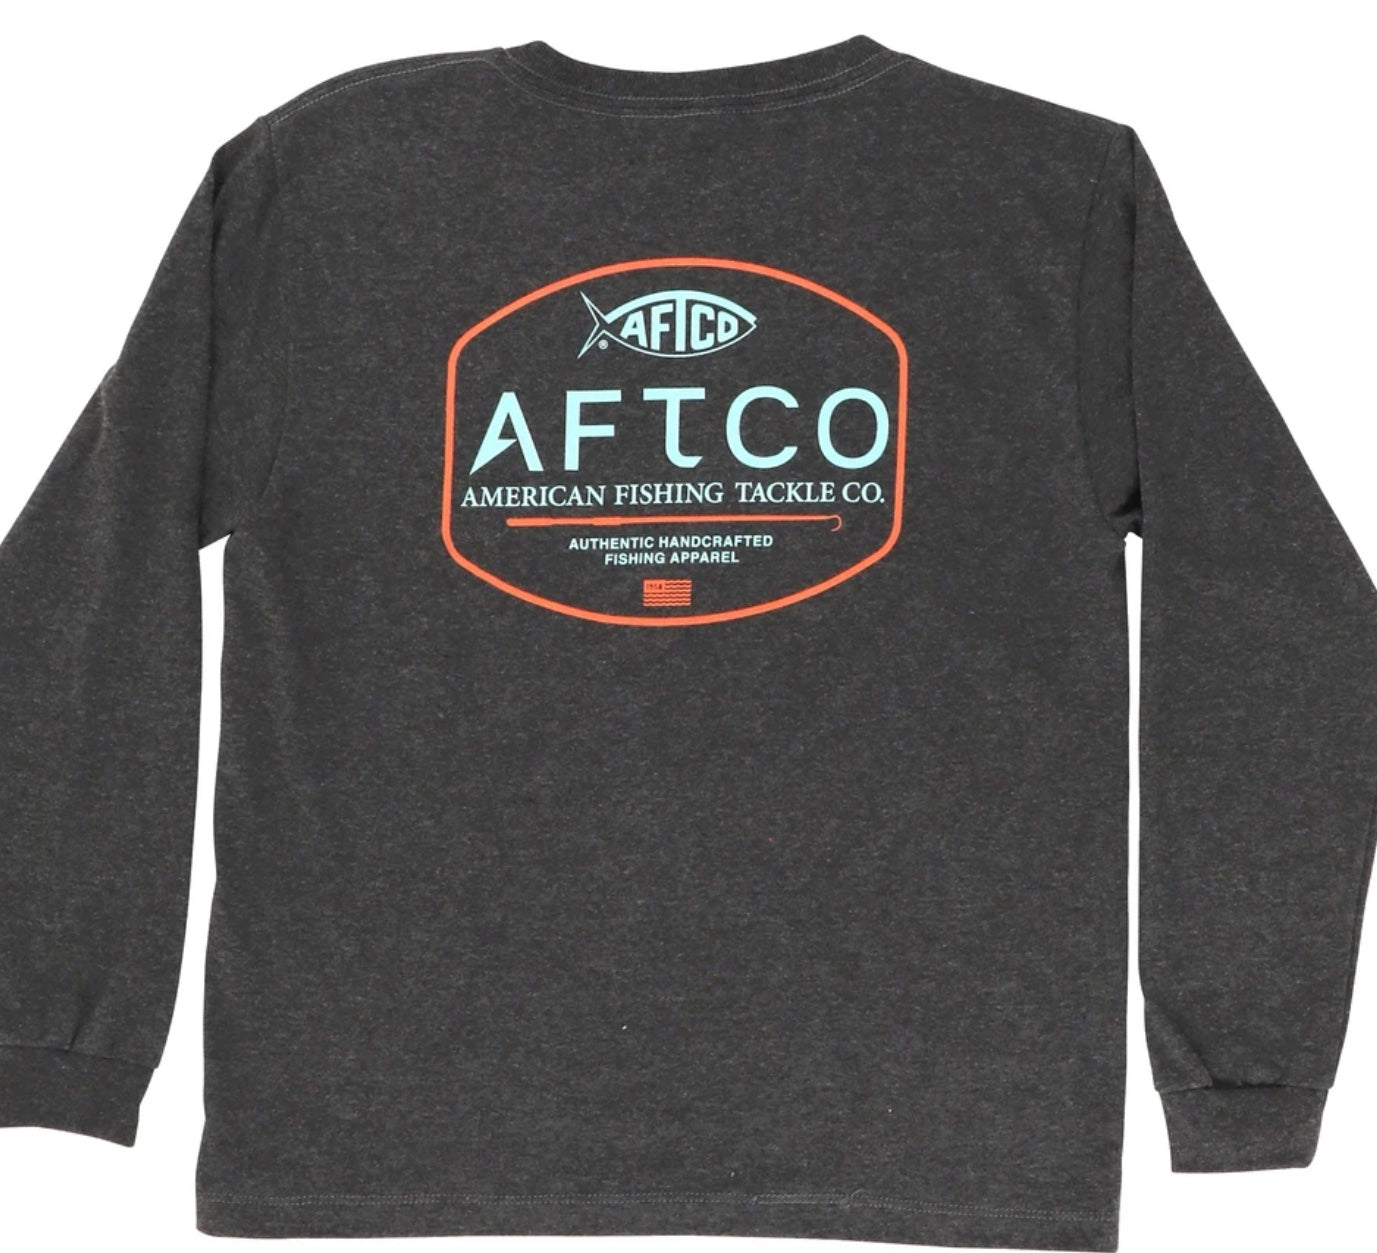 AFTCO YOUTH HANDCRAFTED LS T-SHIRT – The Hippie Fish